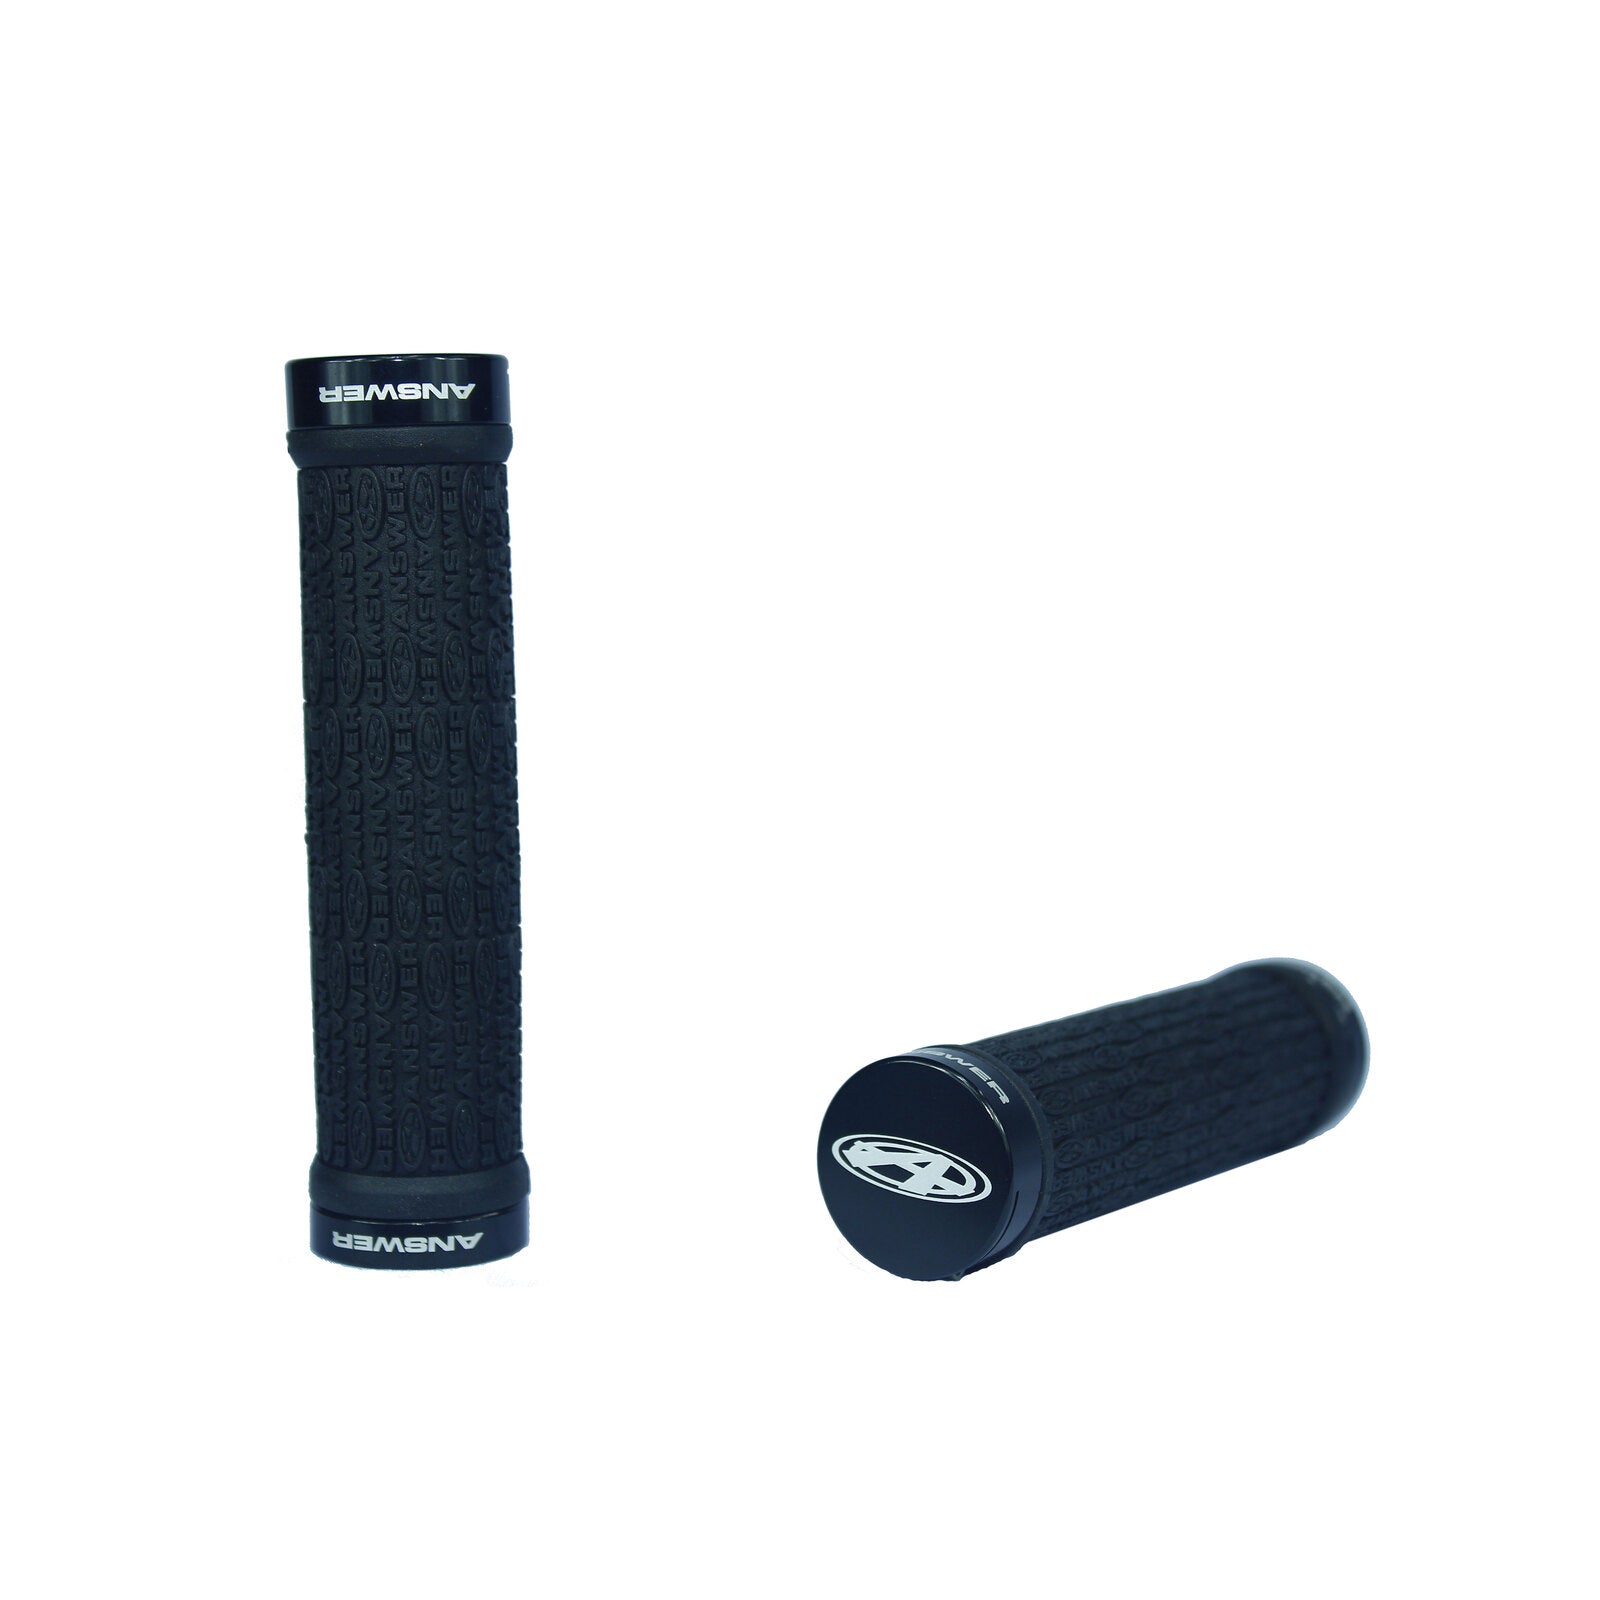 A pair of Answer Pro Lock-On Flangless grips on a white background.